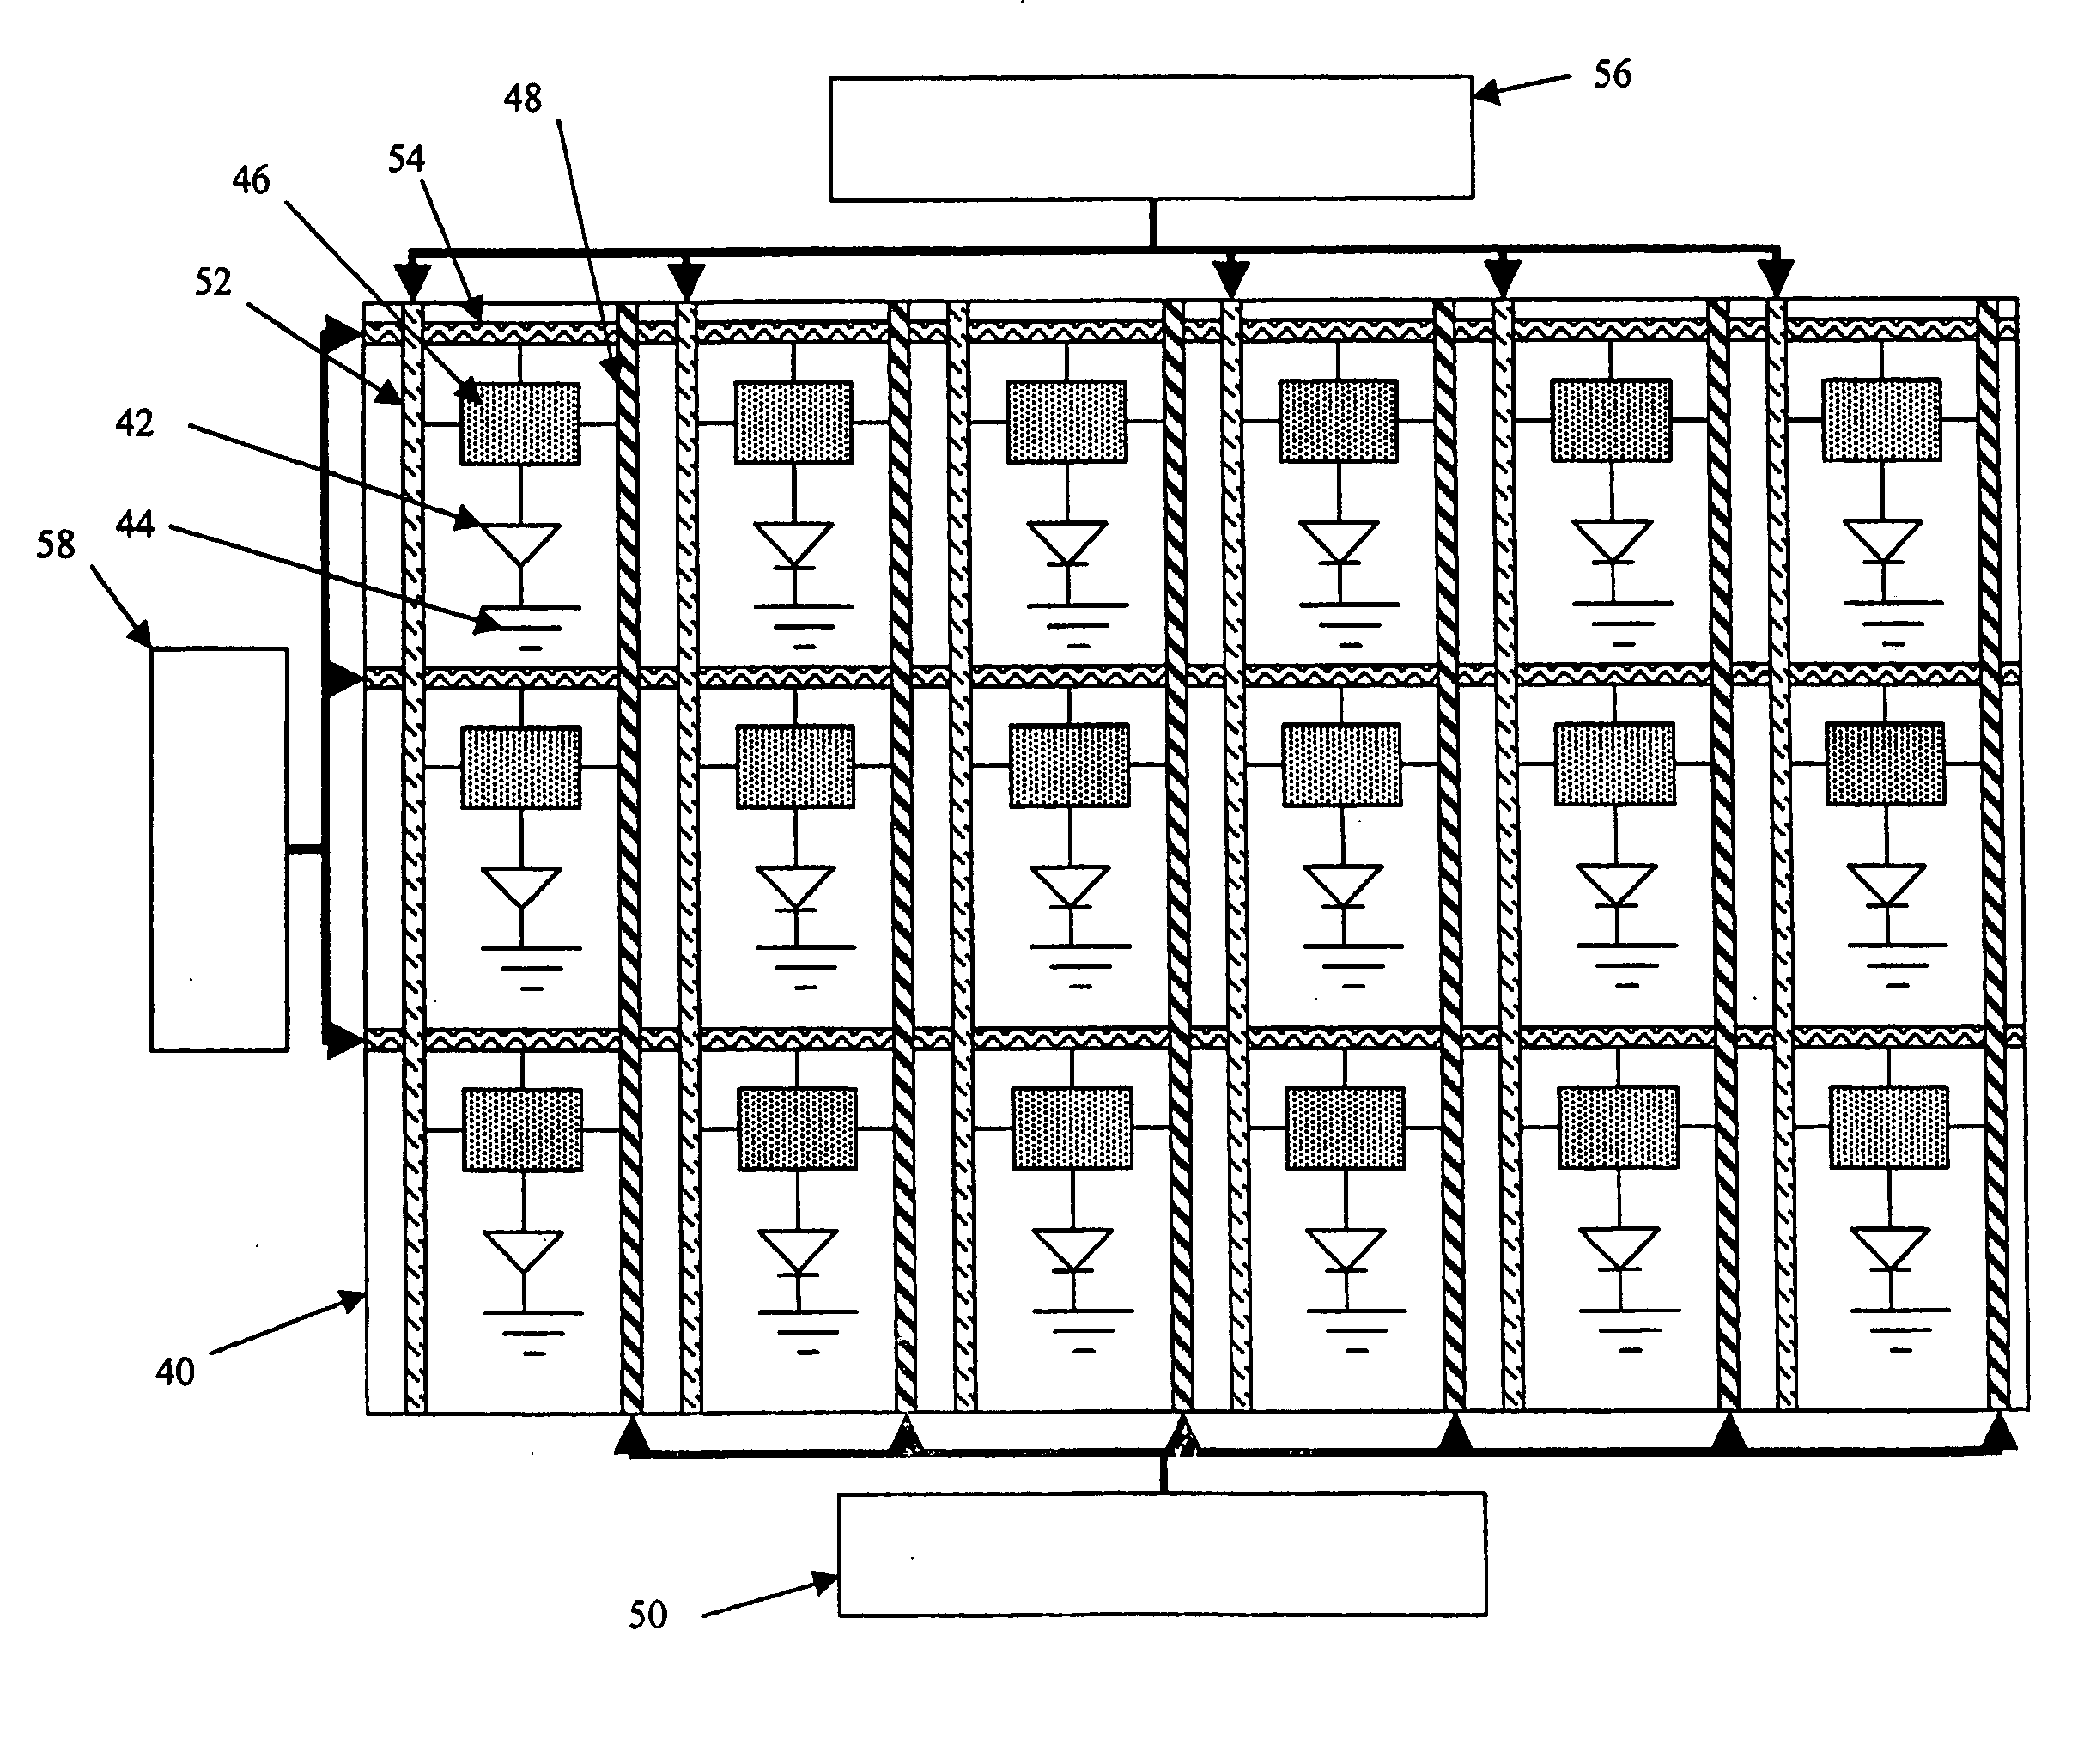 Drive circuit and electro-luminescent display system